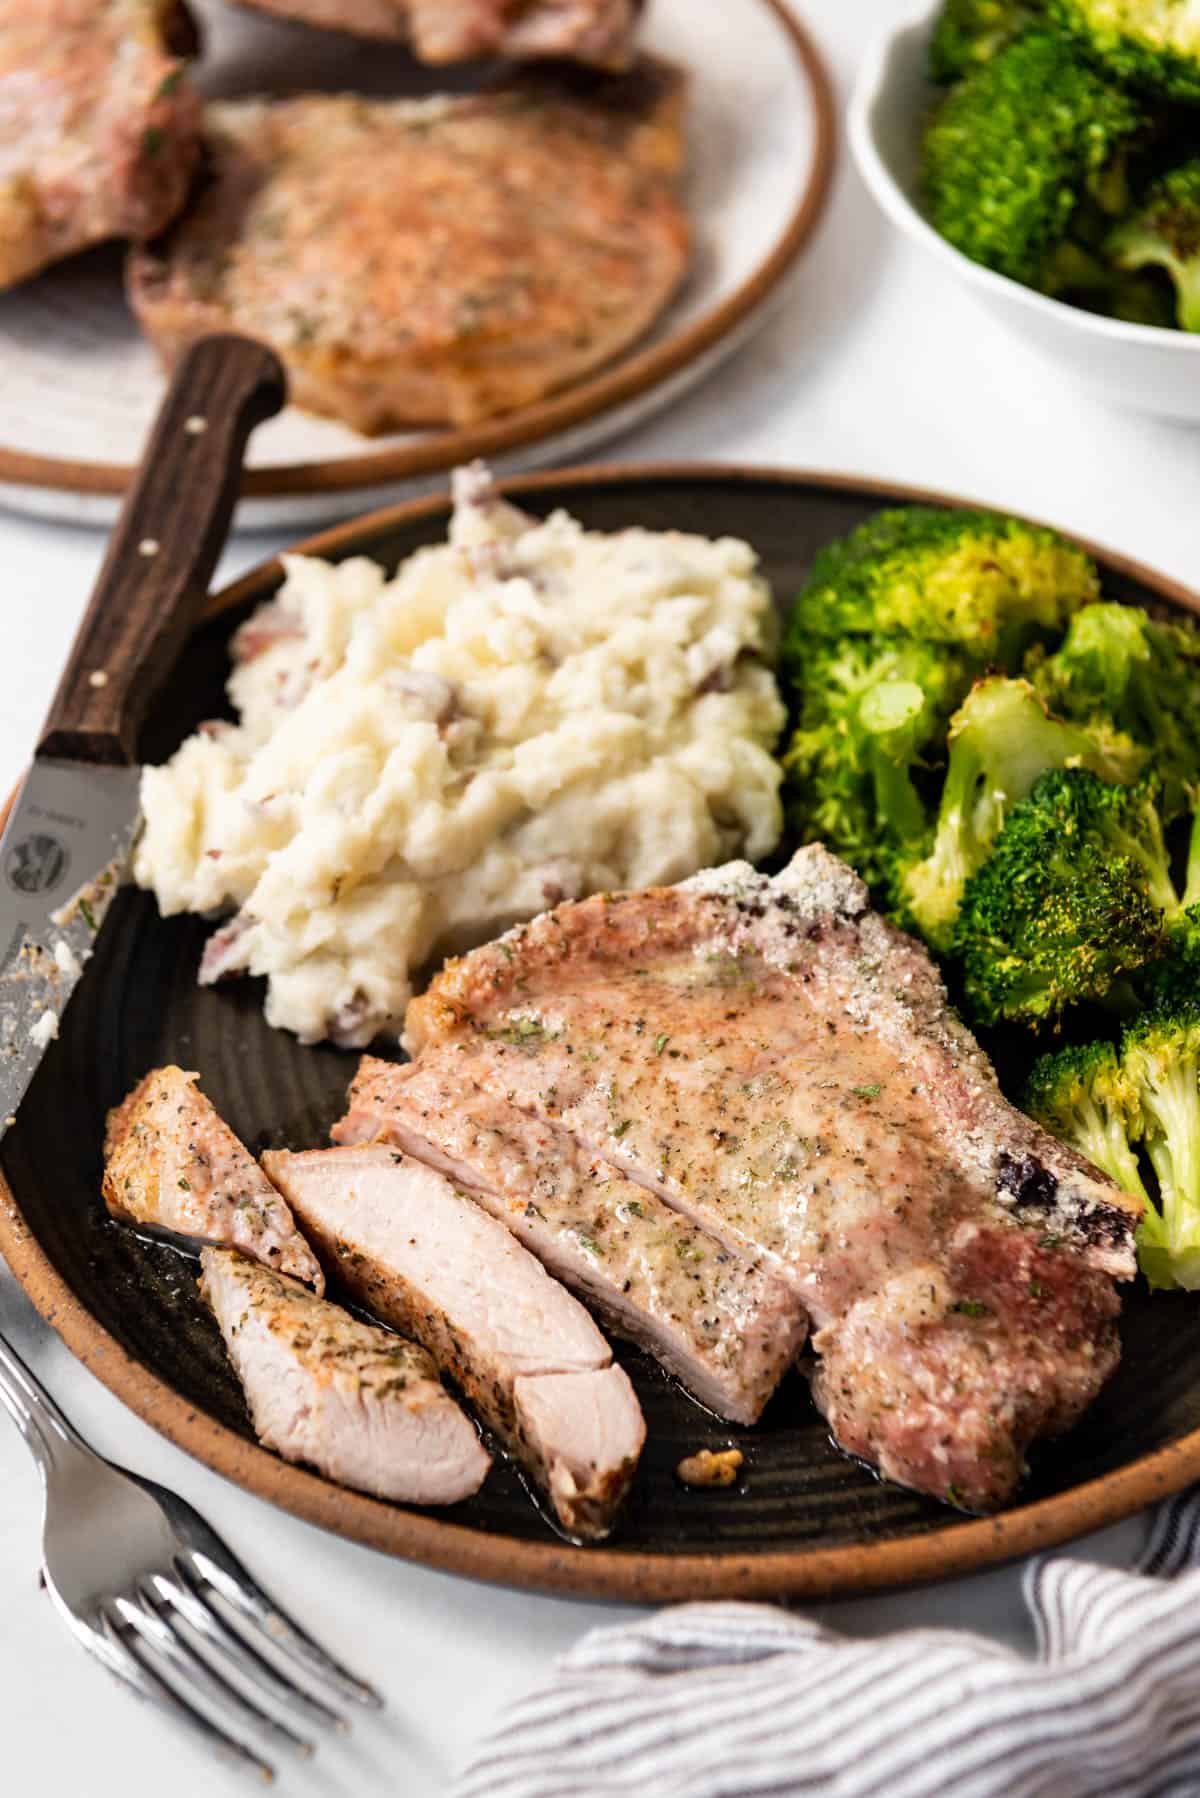 A partially sliced bone-in ranch pork chop on a plate with mashed potatoes and broccoli.